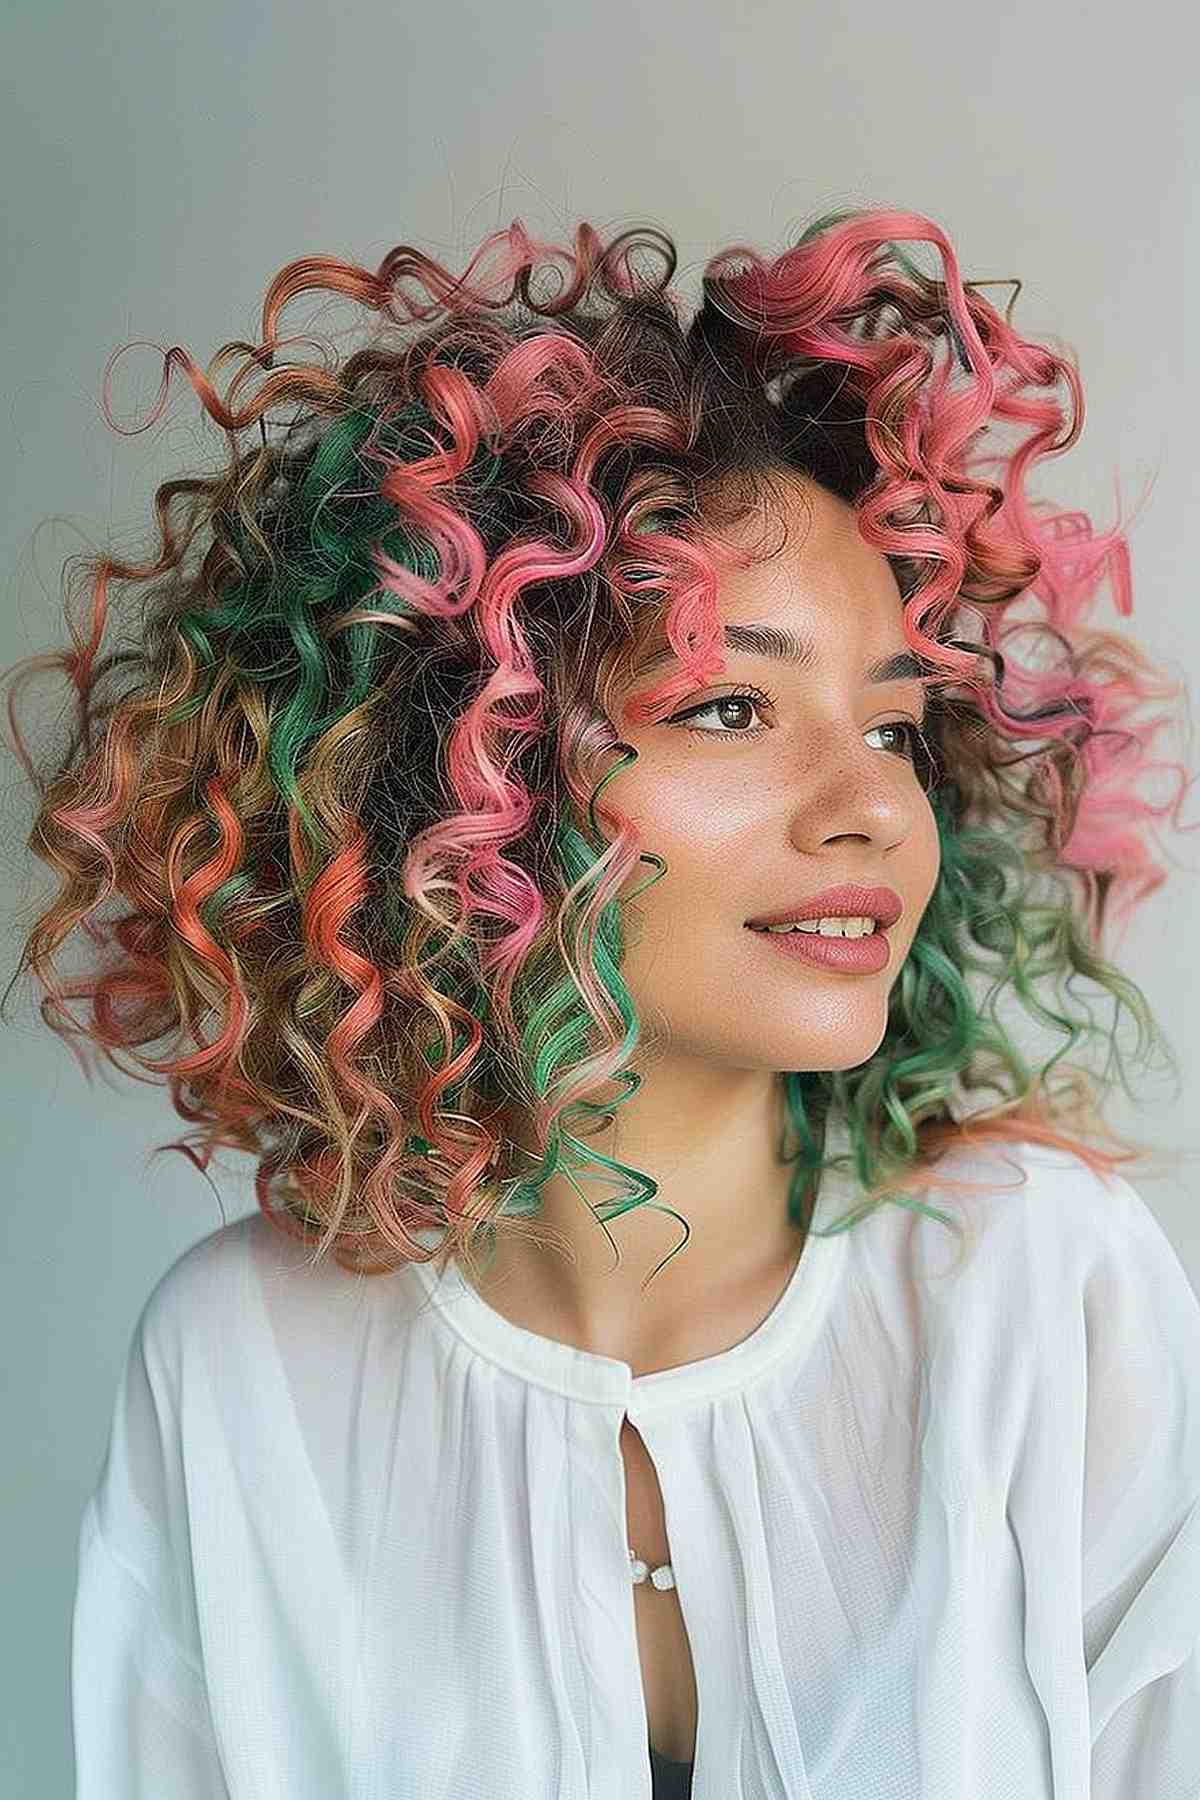 A woman with naturally curly hair featuring vibrant pink and green highlights, creating a playful and colorful look that enhances the lively texture of her curls.